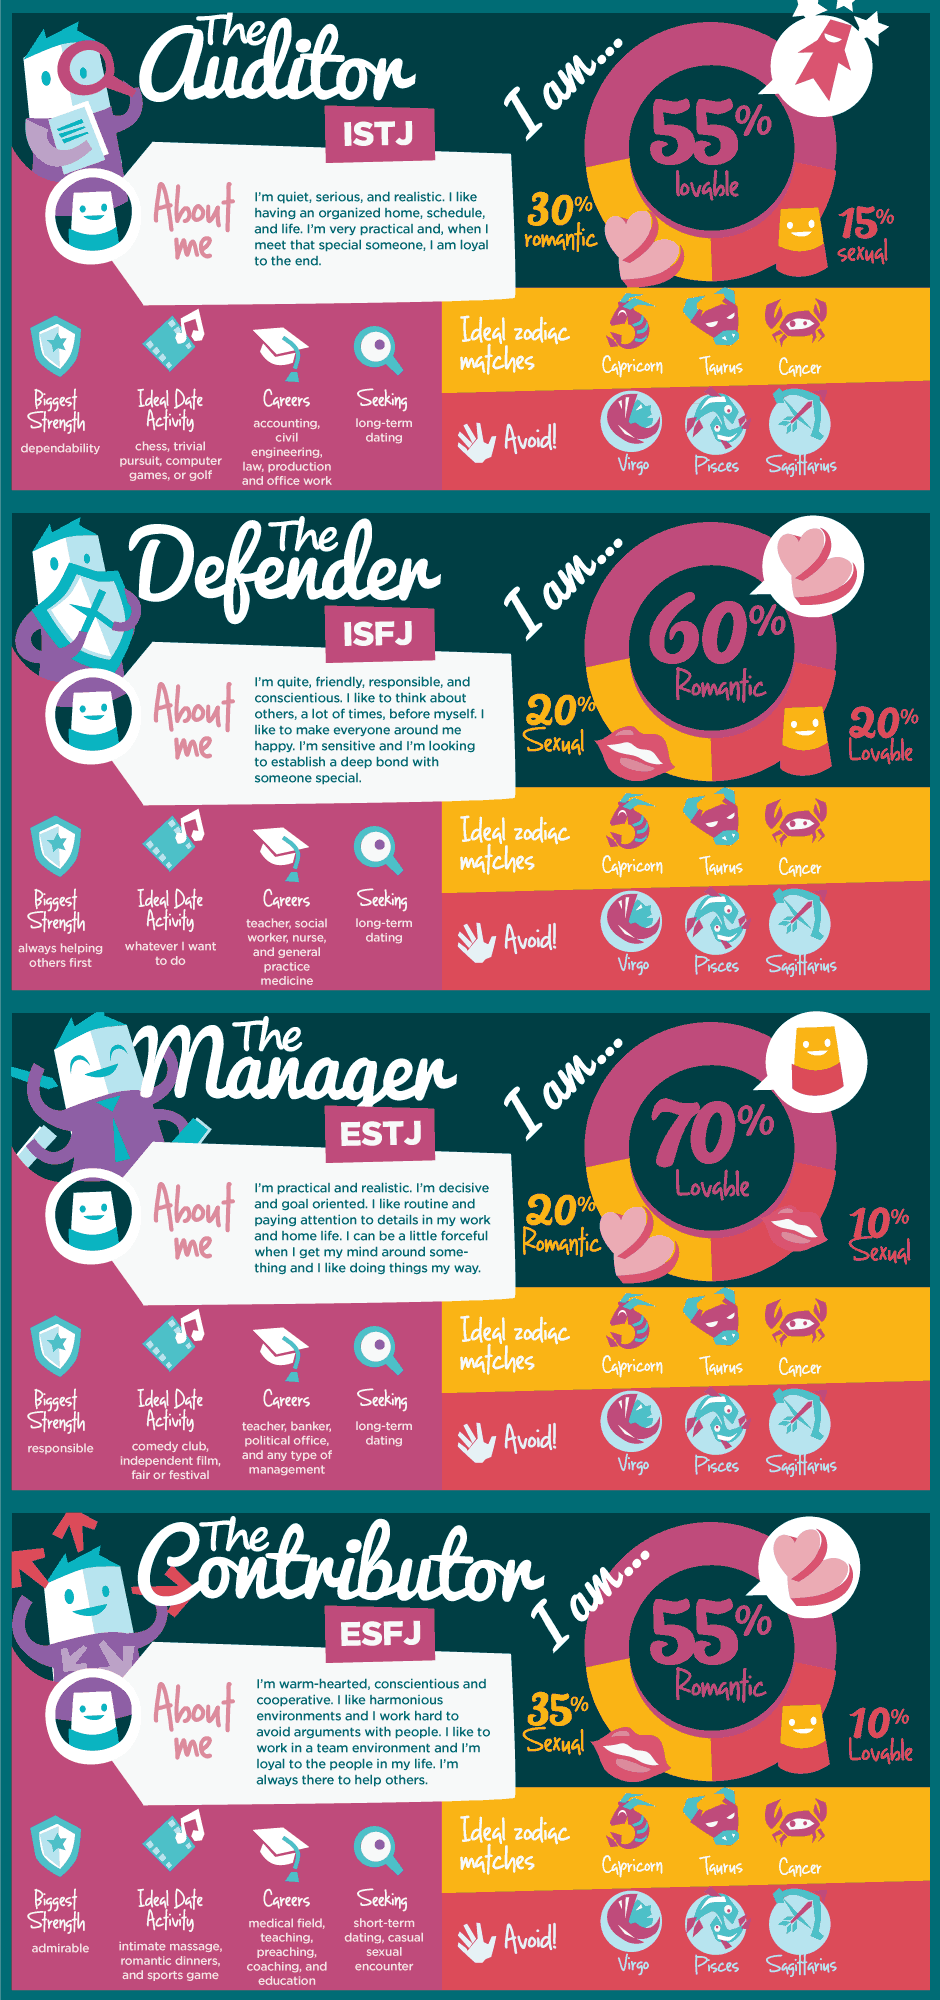 mbti-dating-infographic-section2.gif